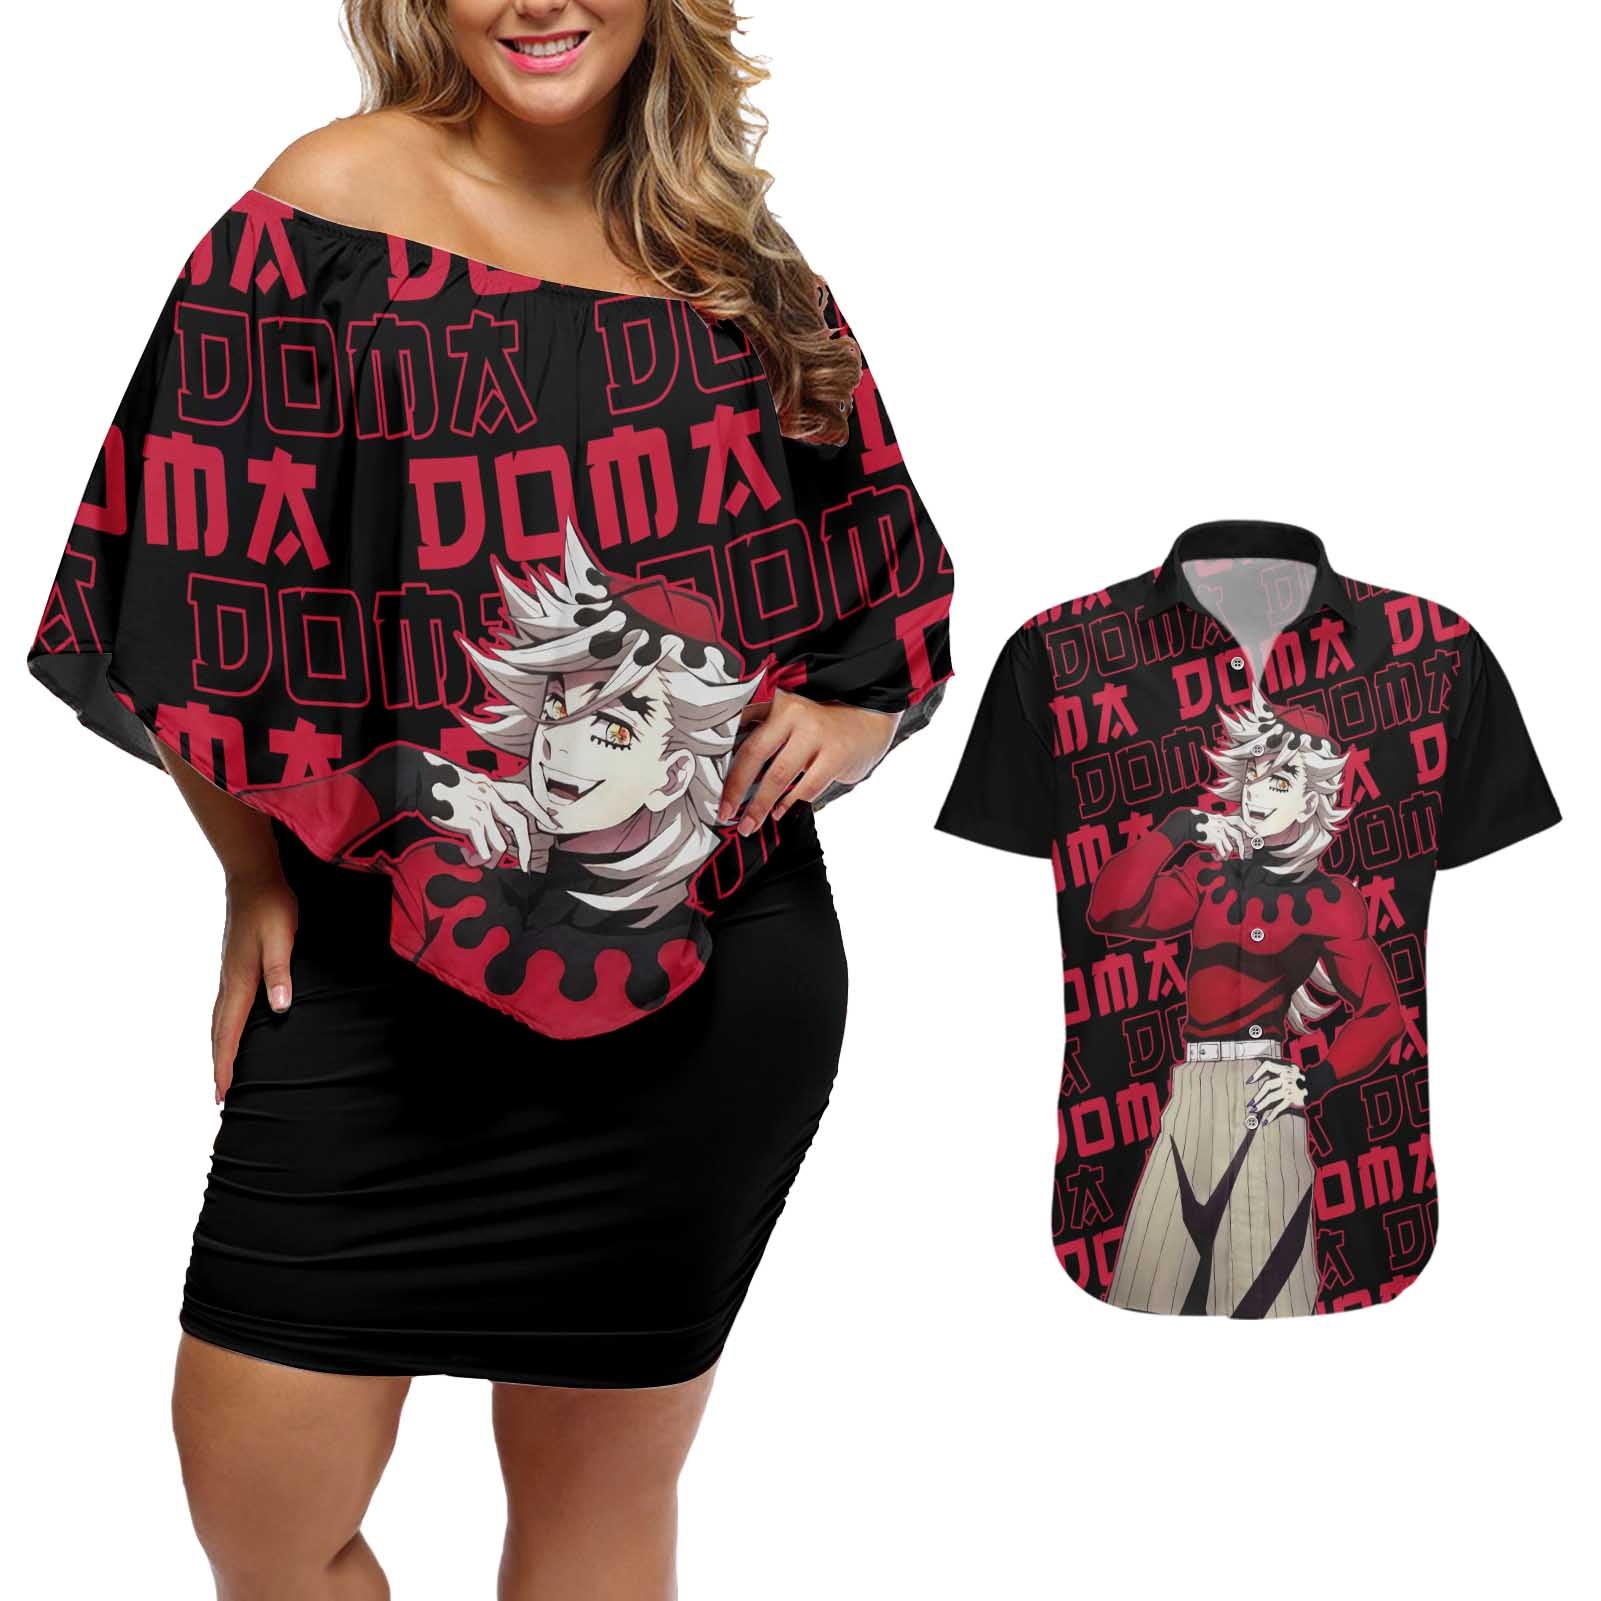 Doma - Demon Slayer Couples Matching Off Shoulder Short Dress and Hawaiian Shirt Anime Mix Pattern Style